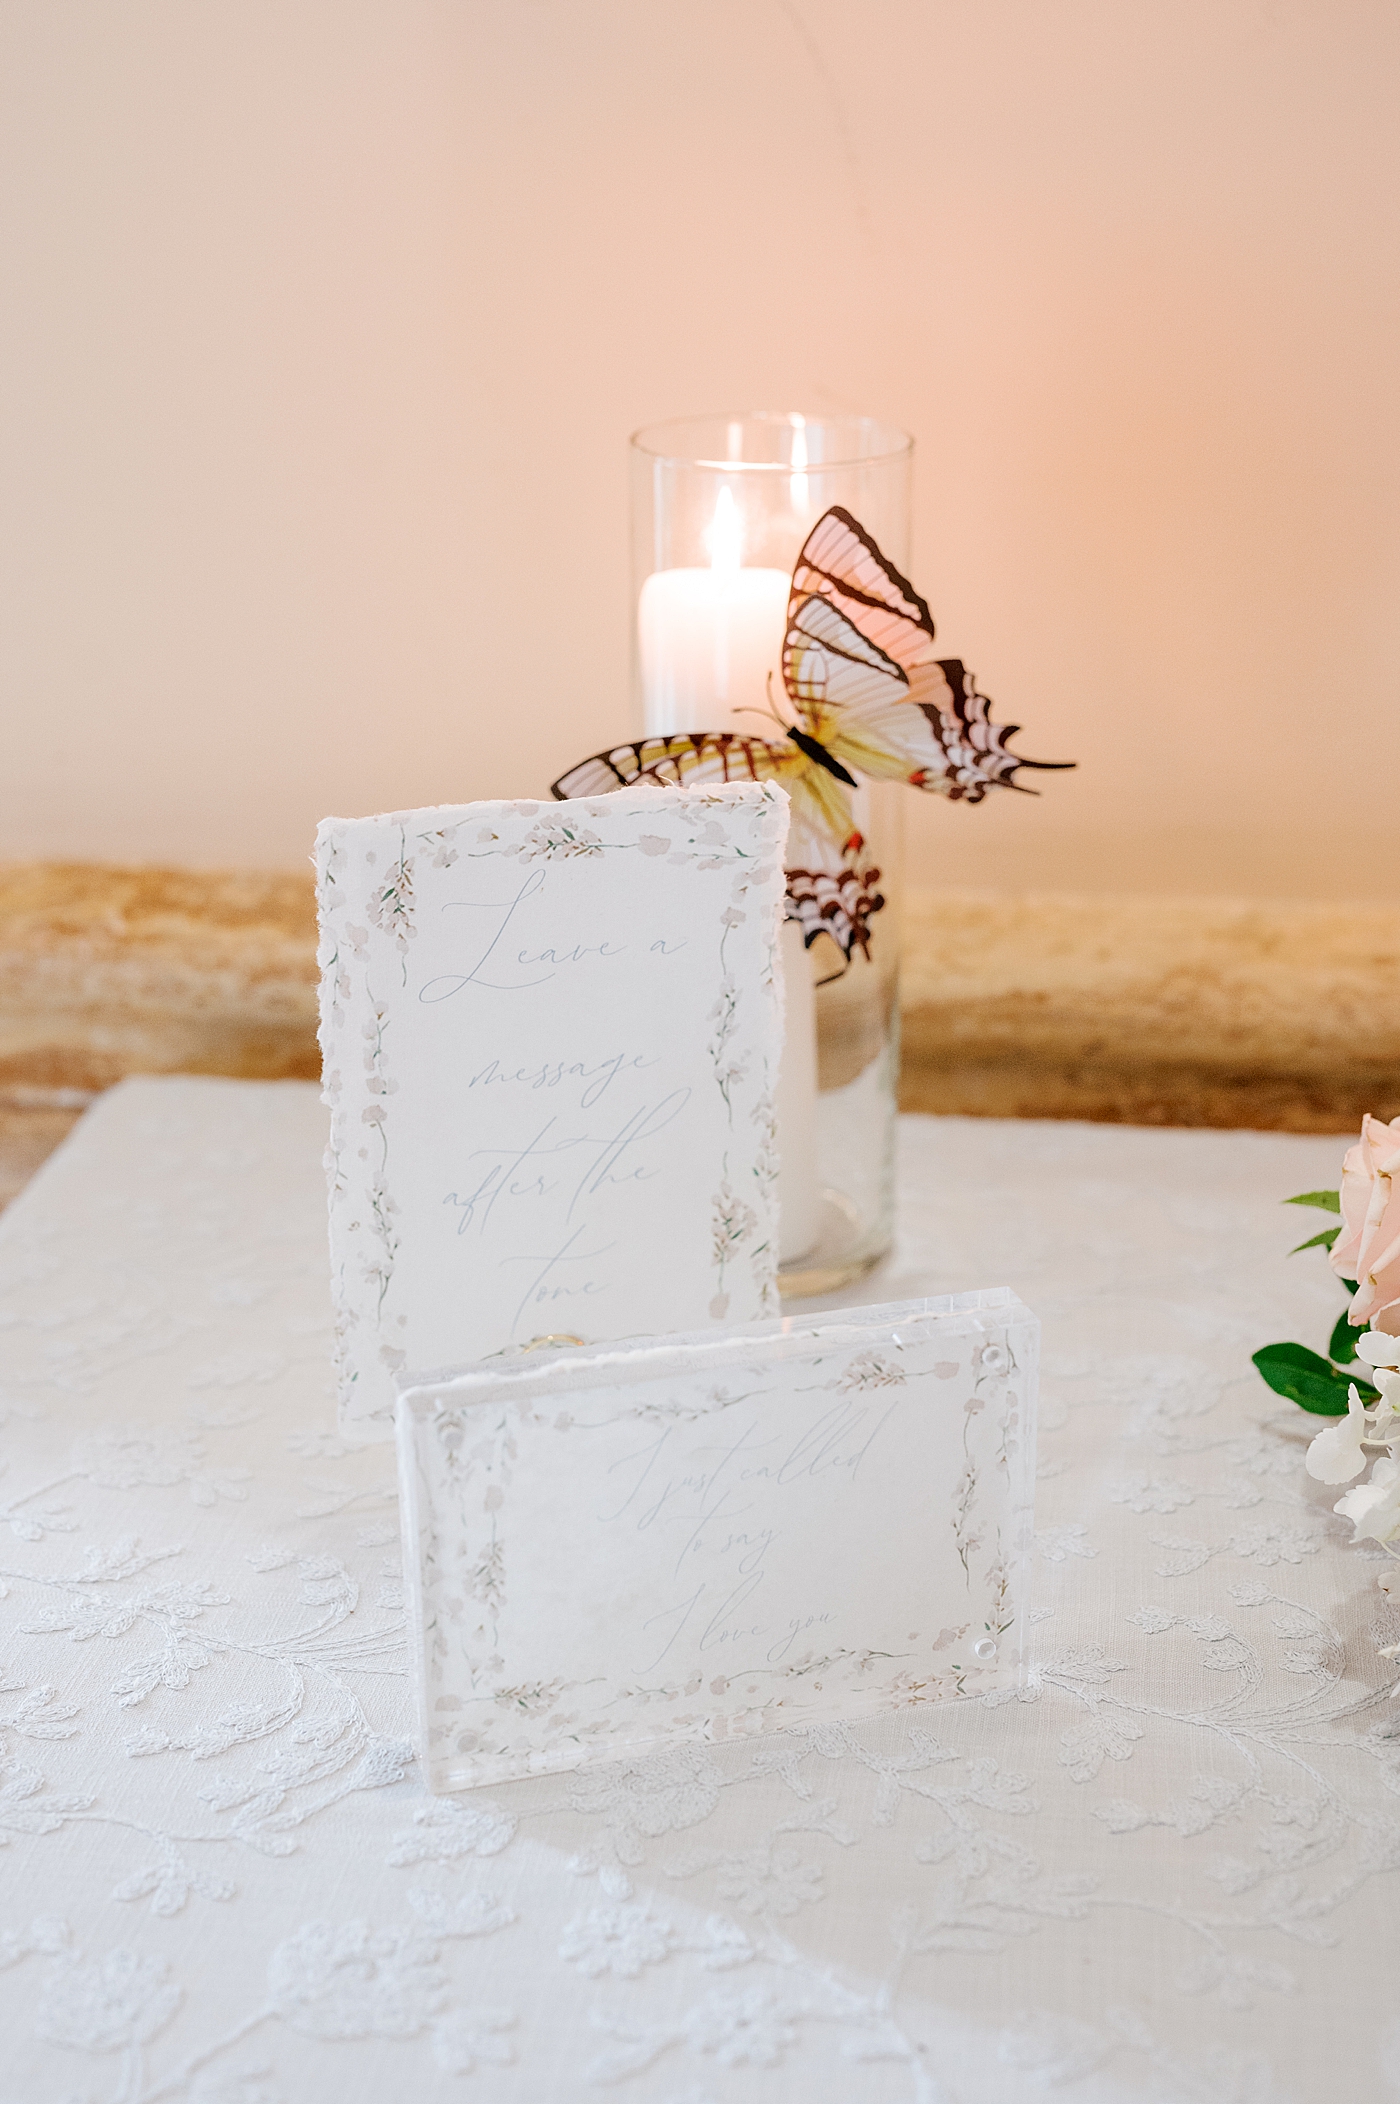 Wedding cards with butterflies | Image by Hope Helmuth Photography